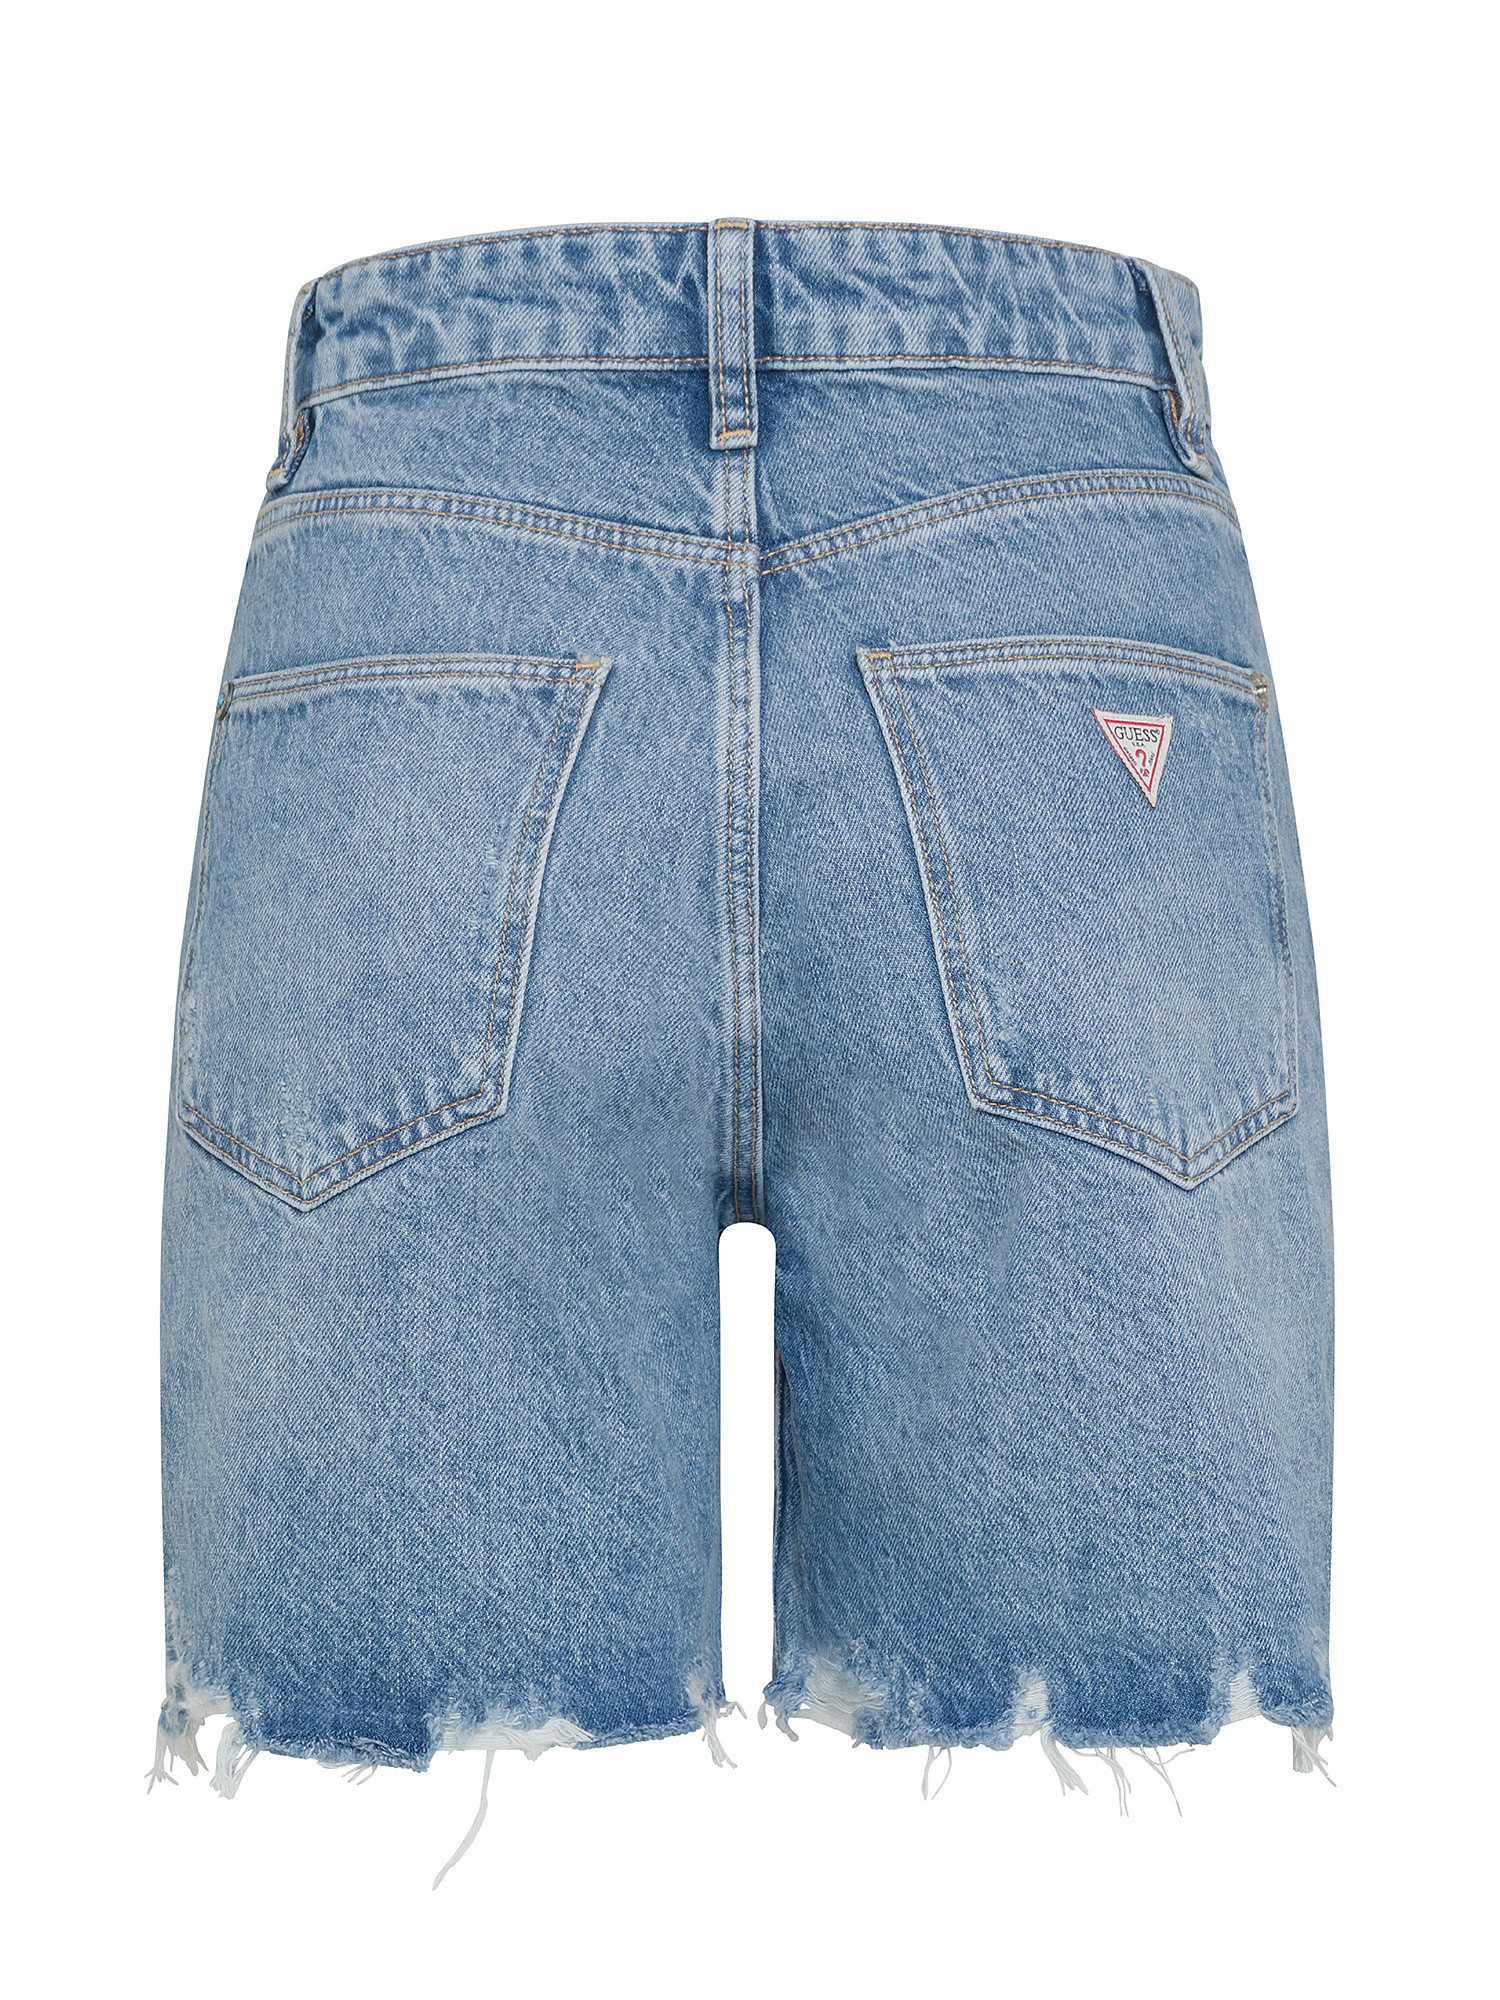 GUESS - Denim shorts, with high waist, Denim, large image number 1